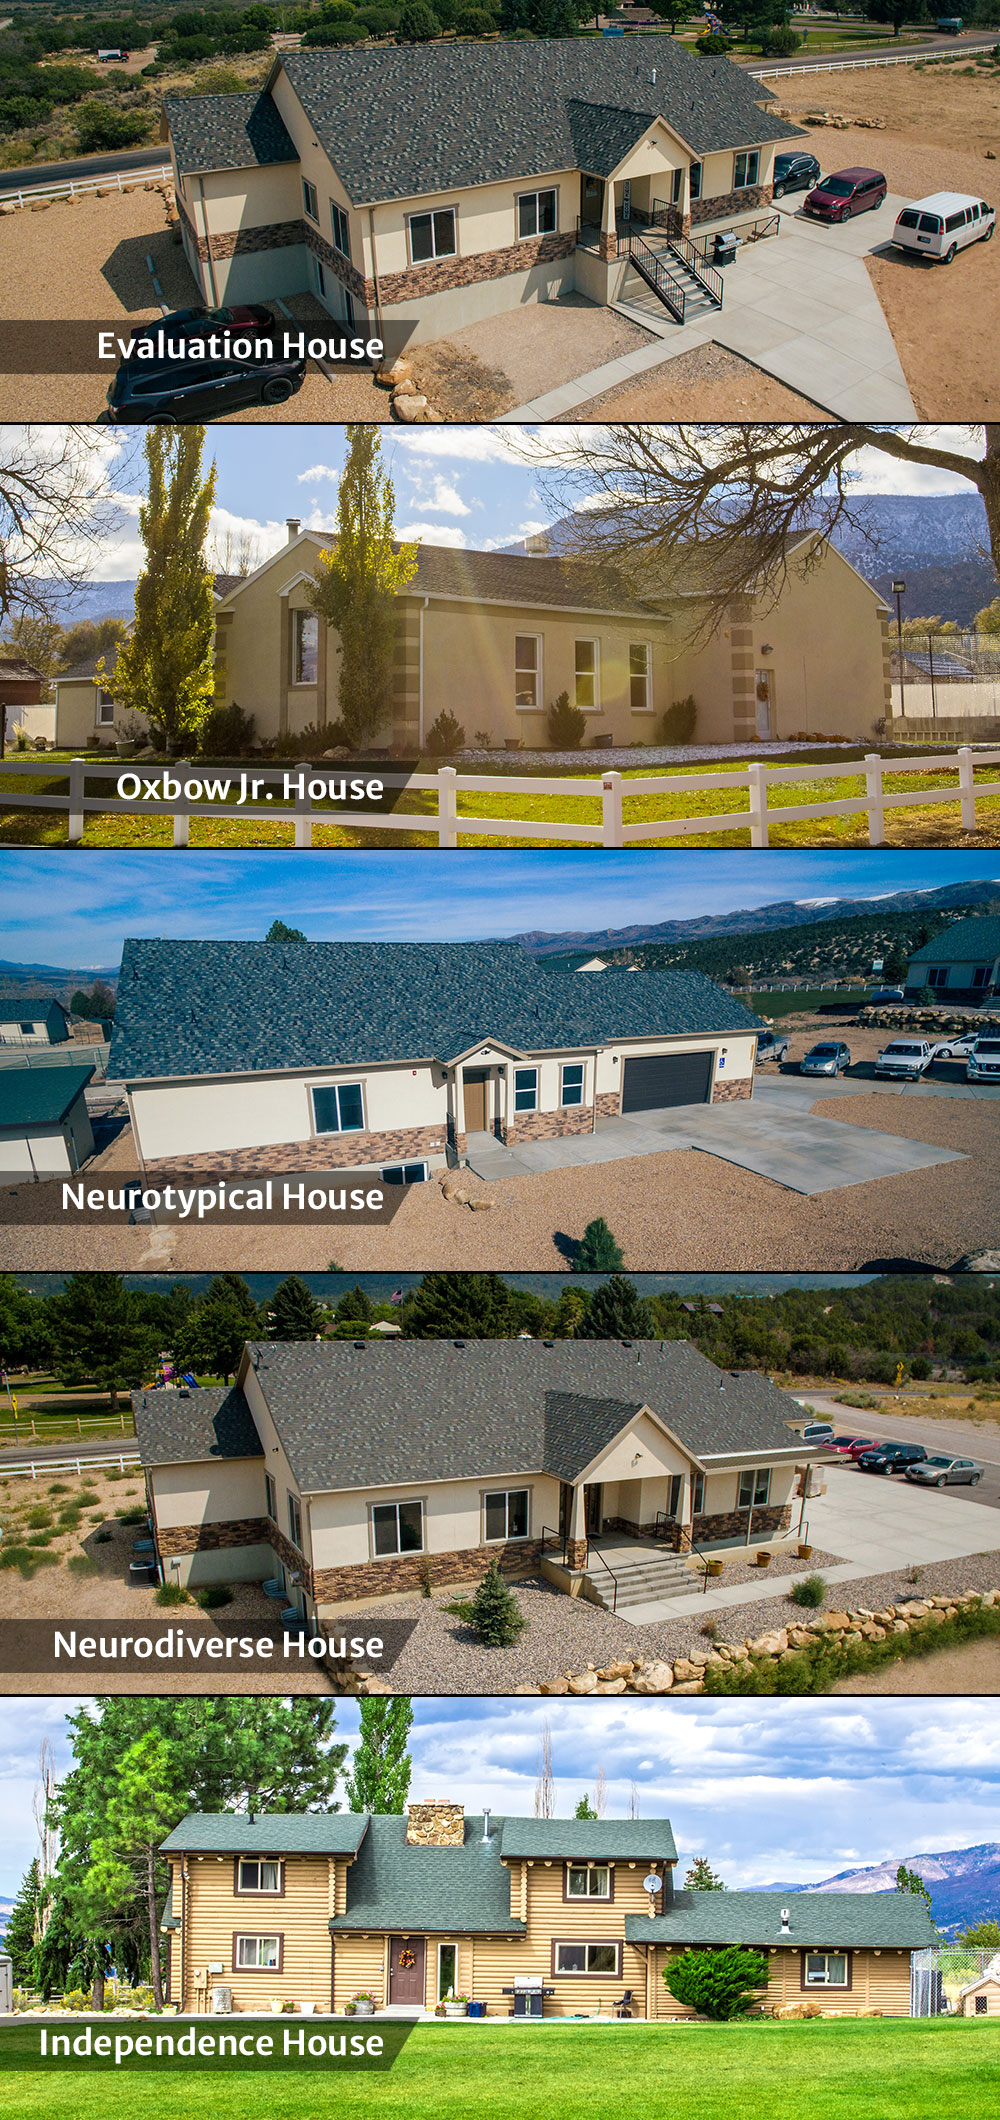 Campus Tour of all the deferent populations at Oxbow Academy, Evaluation House, Oxbow Jr. House, Neurotypical House, Neurodiverse House, and the Independence House.